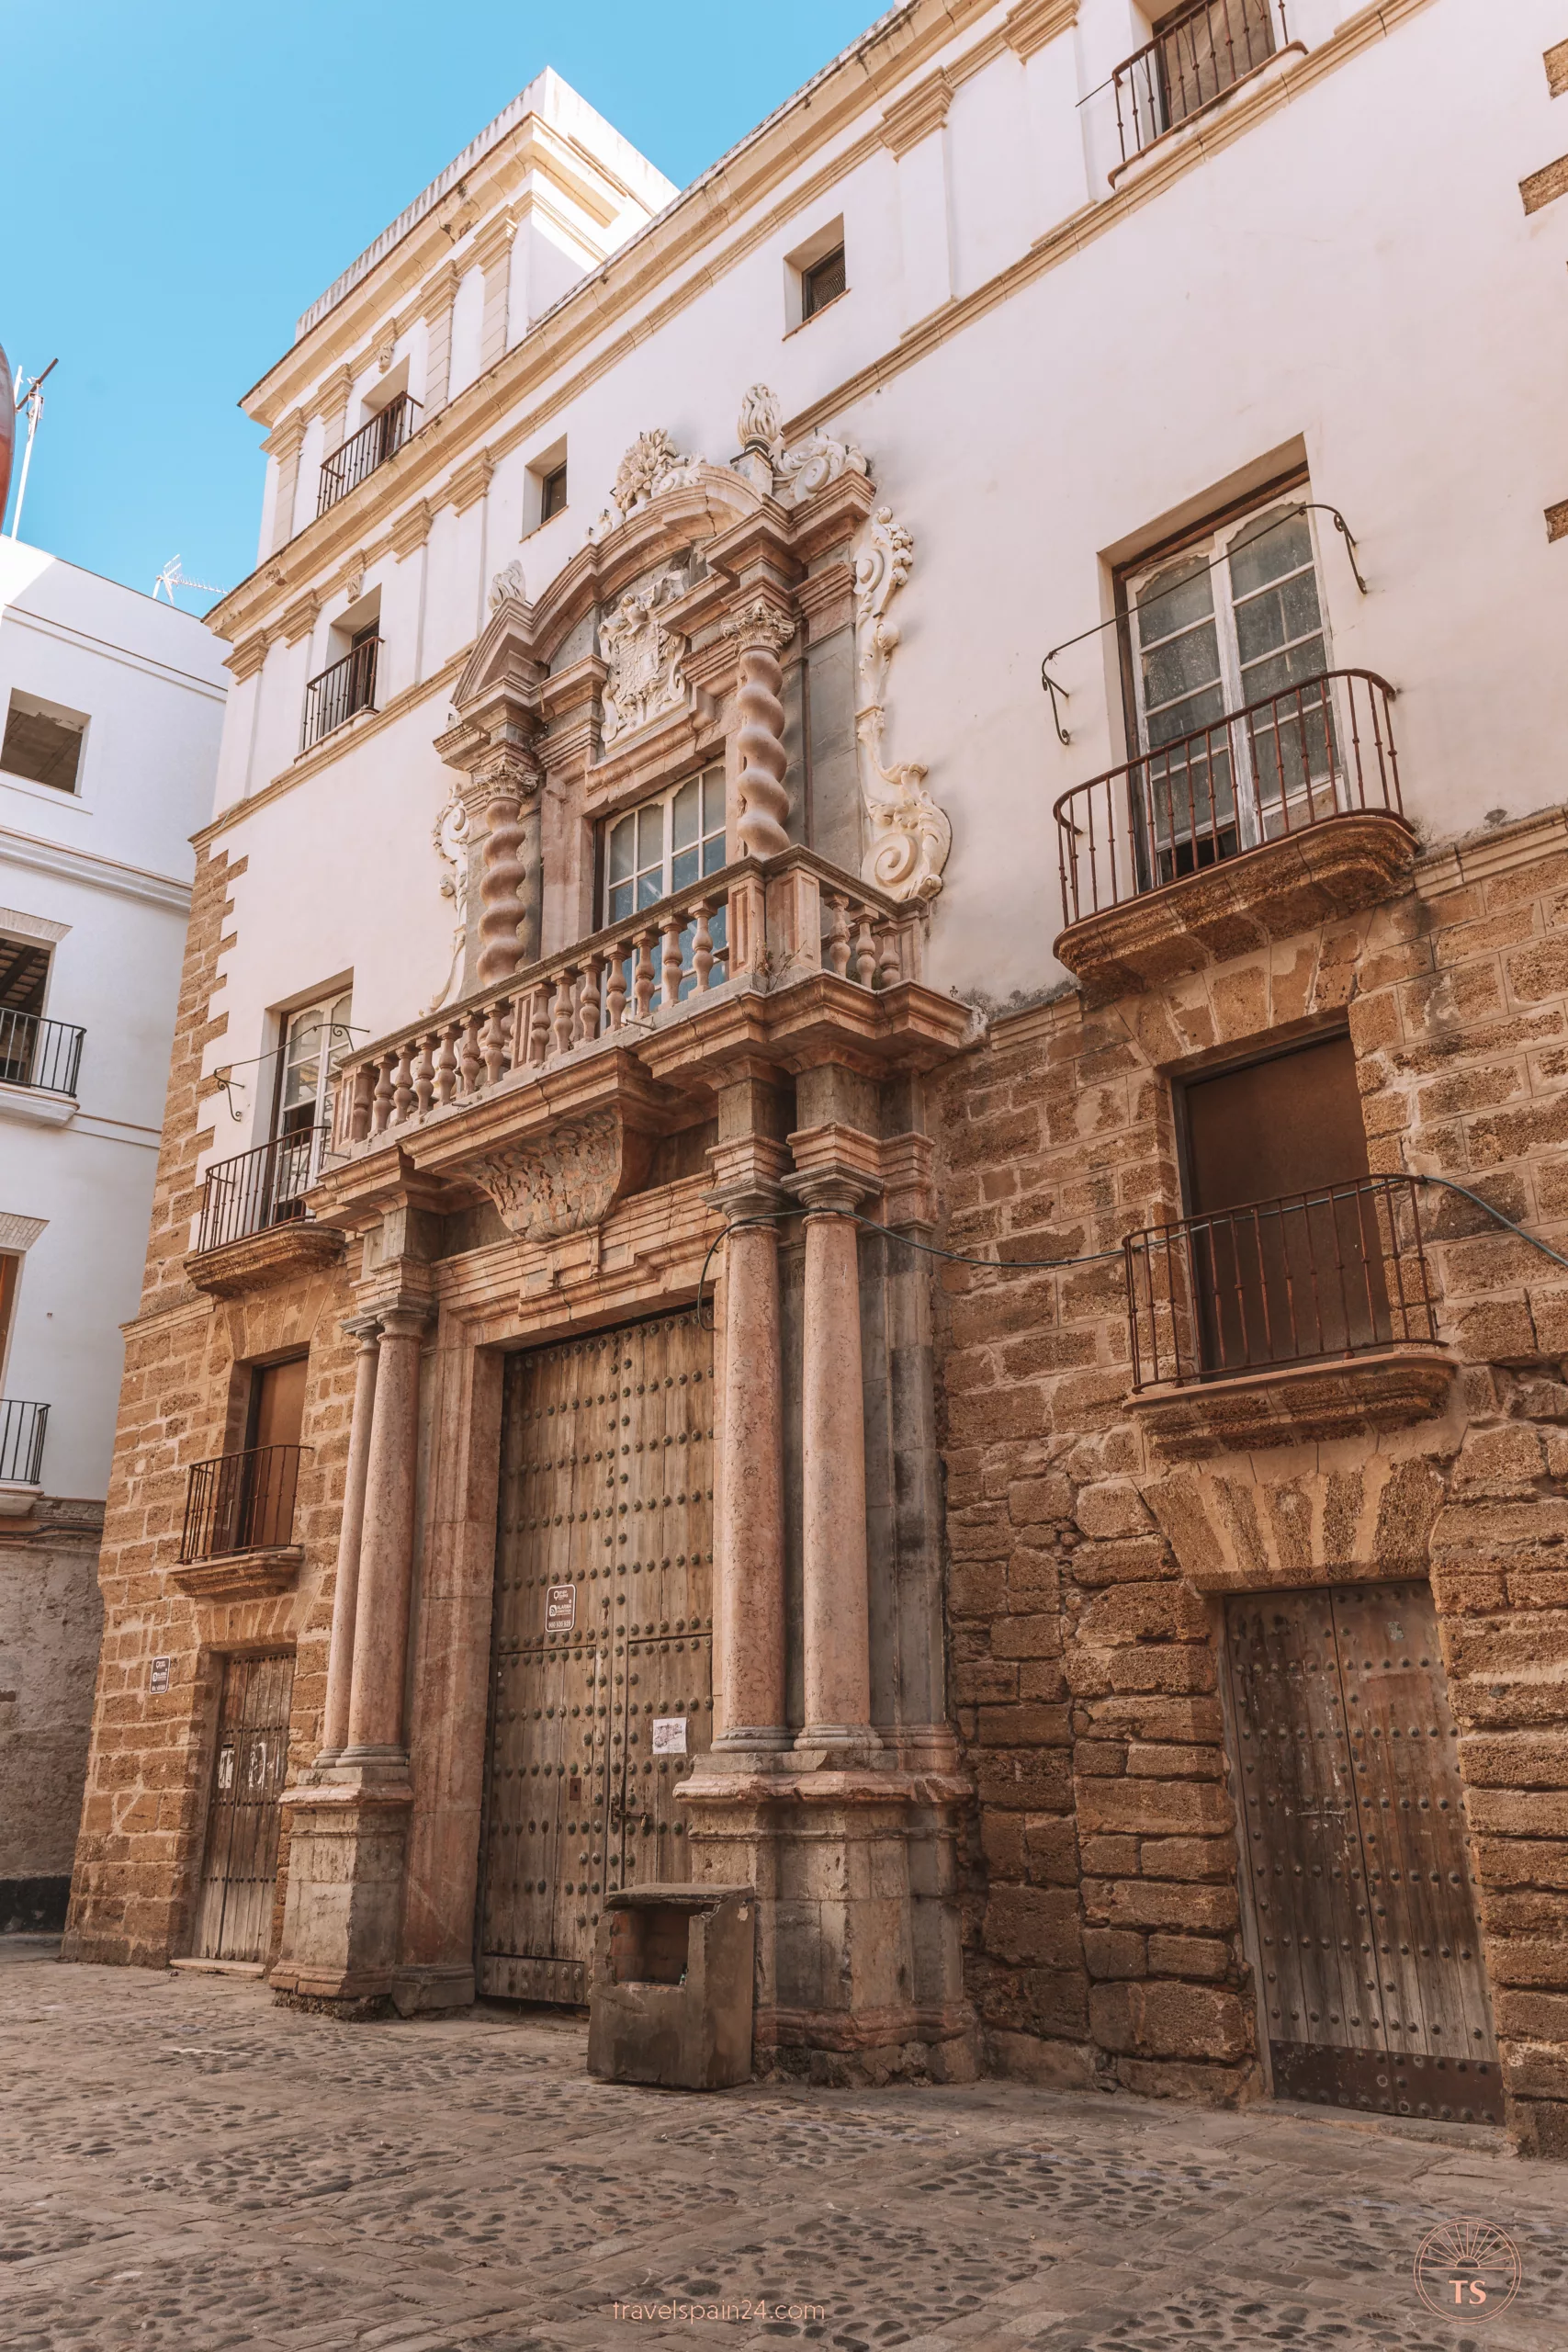 The entrance of Casa Palacio del Almirante in Cadiz. This historic building is one of the Cadiz highlights, illustrating the city's rich architectural heritage.
